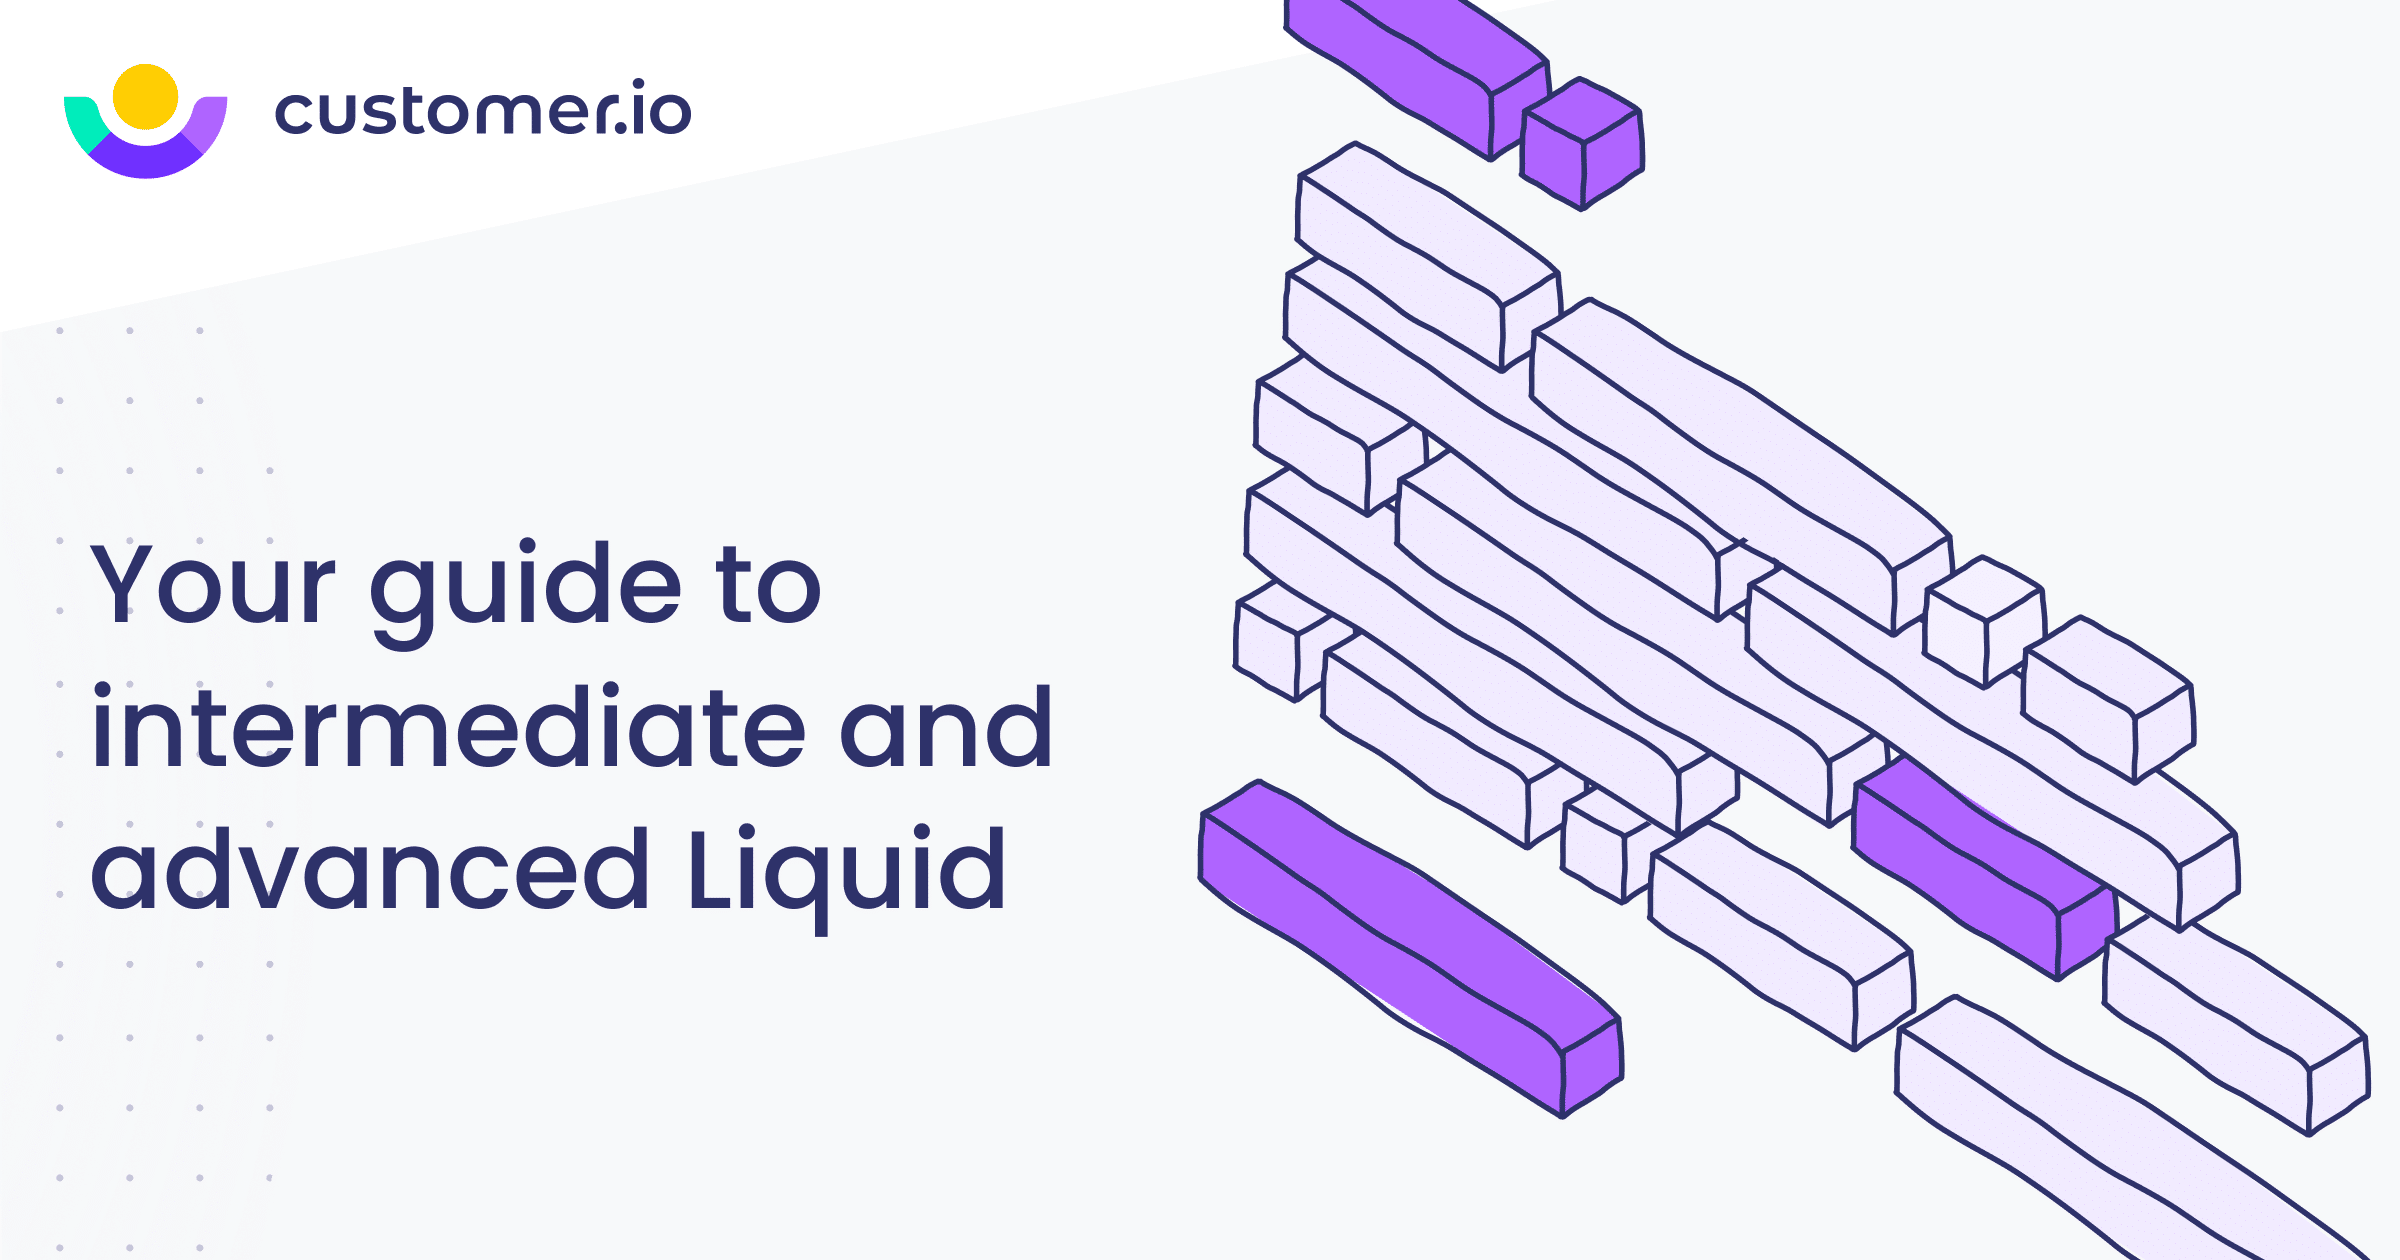 Your guide to intermediate and advanced Liquid